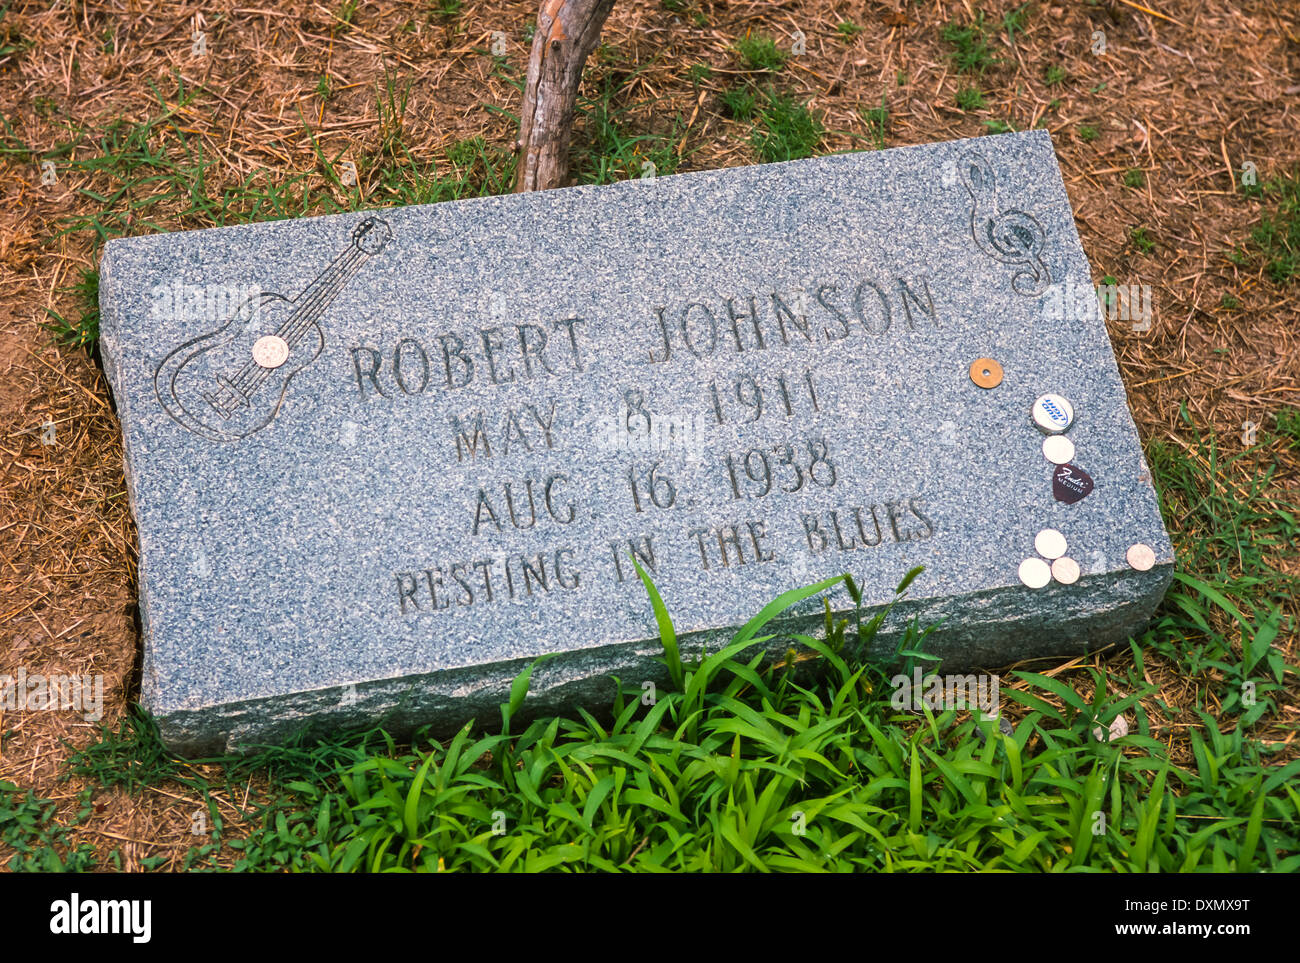 MISSISSIPPI, USA - Grave marker possible burial site of Robert Johnson, delta blues musician, cemetery Payne Chapel M. B. Church Stock Photo